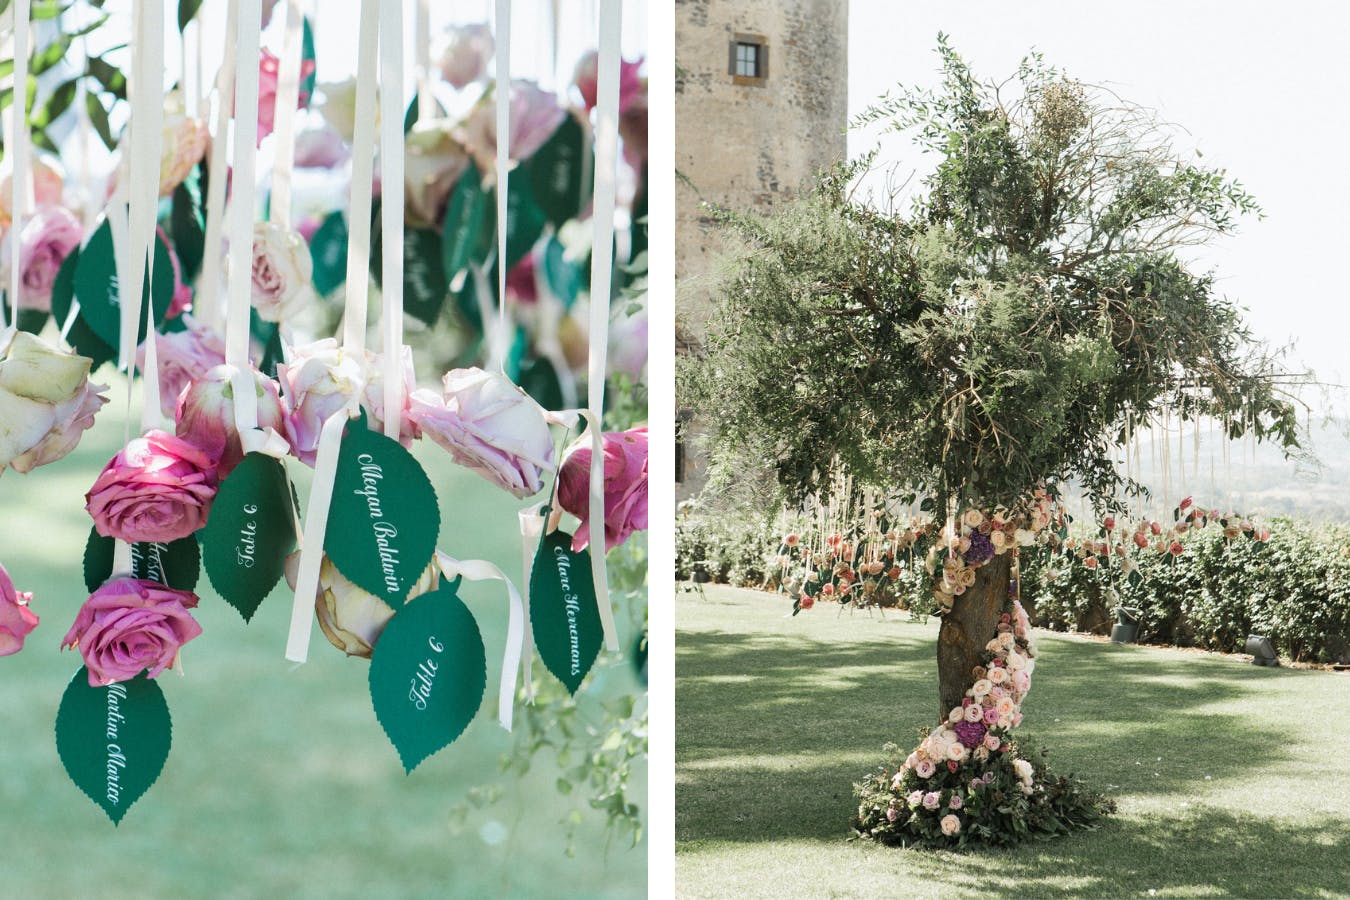 Floral Wrapped Tree With Suspended Leaf-Shaped Wedding Escort Cards and Ribbons Topped by Pink Flowers | PartySlate